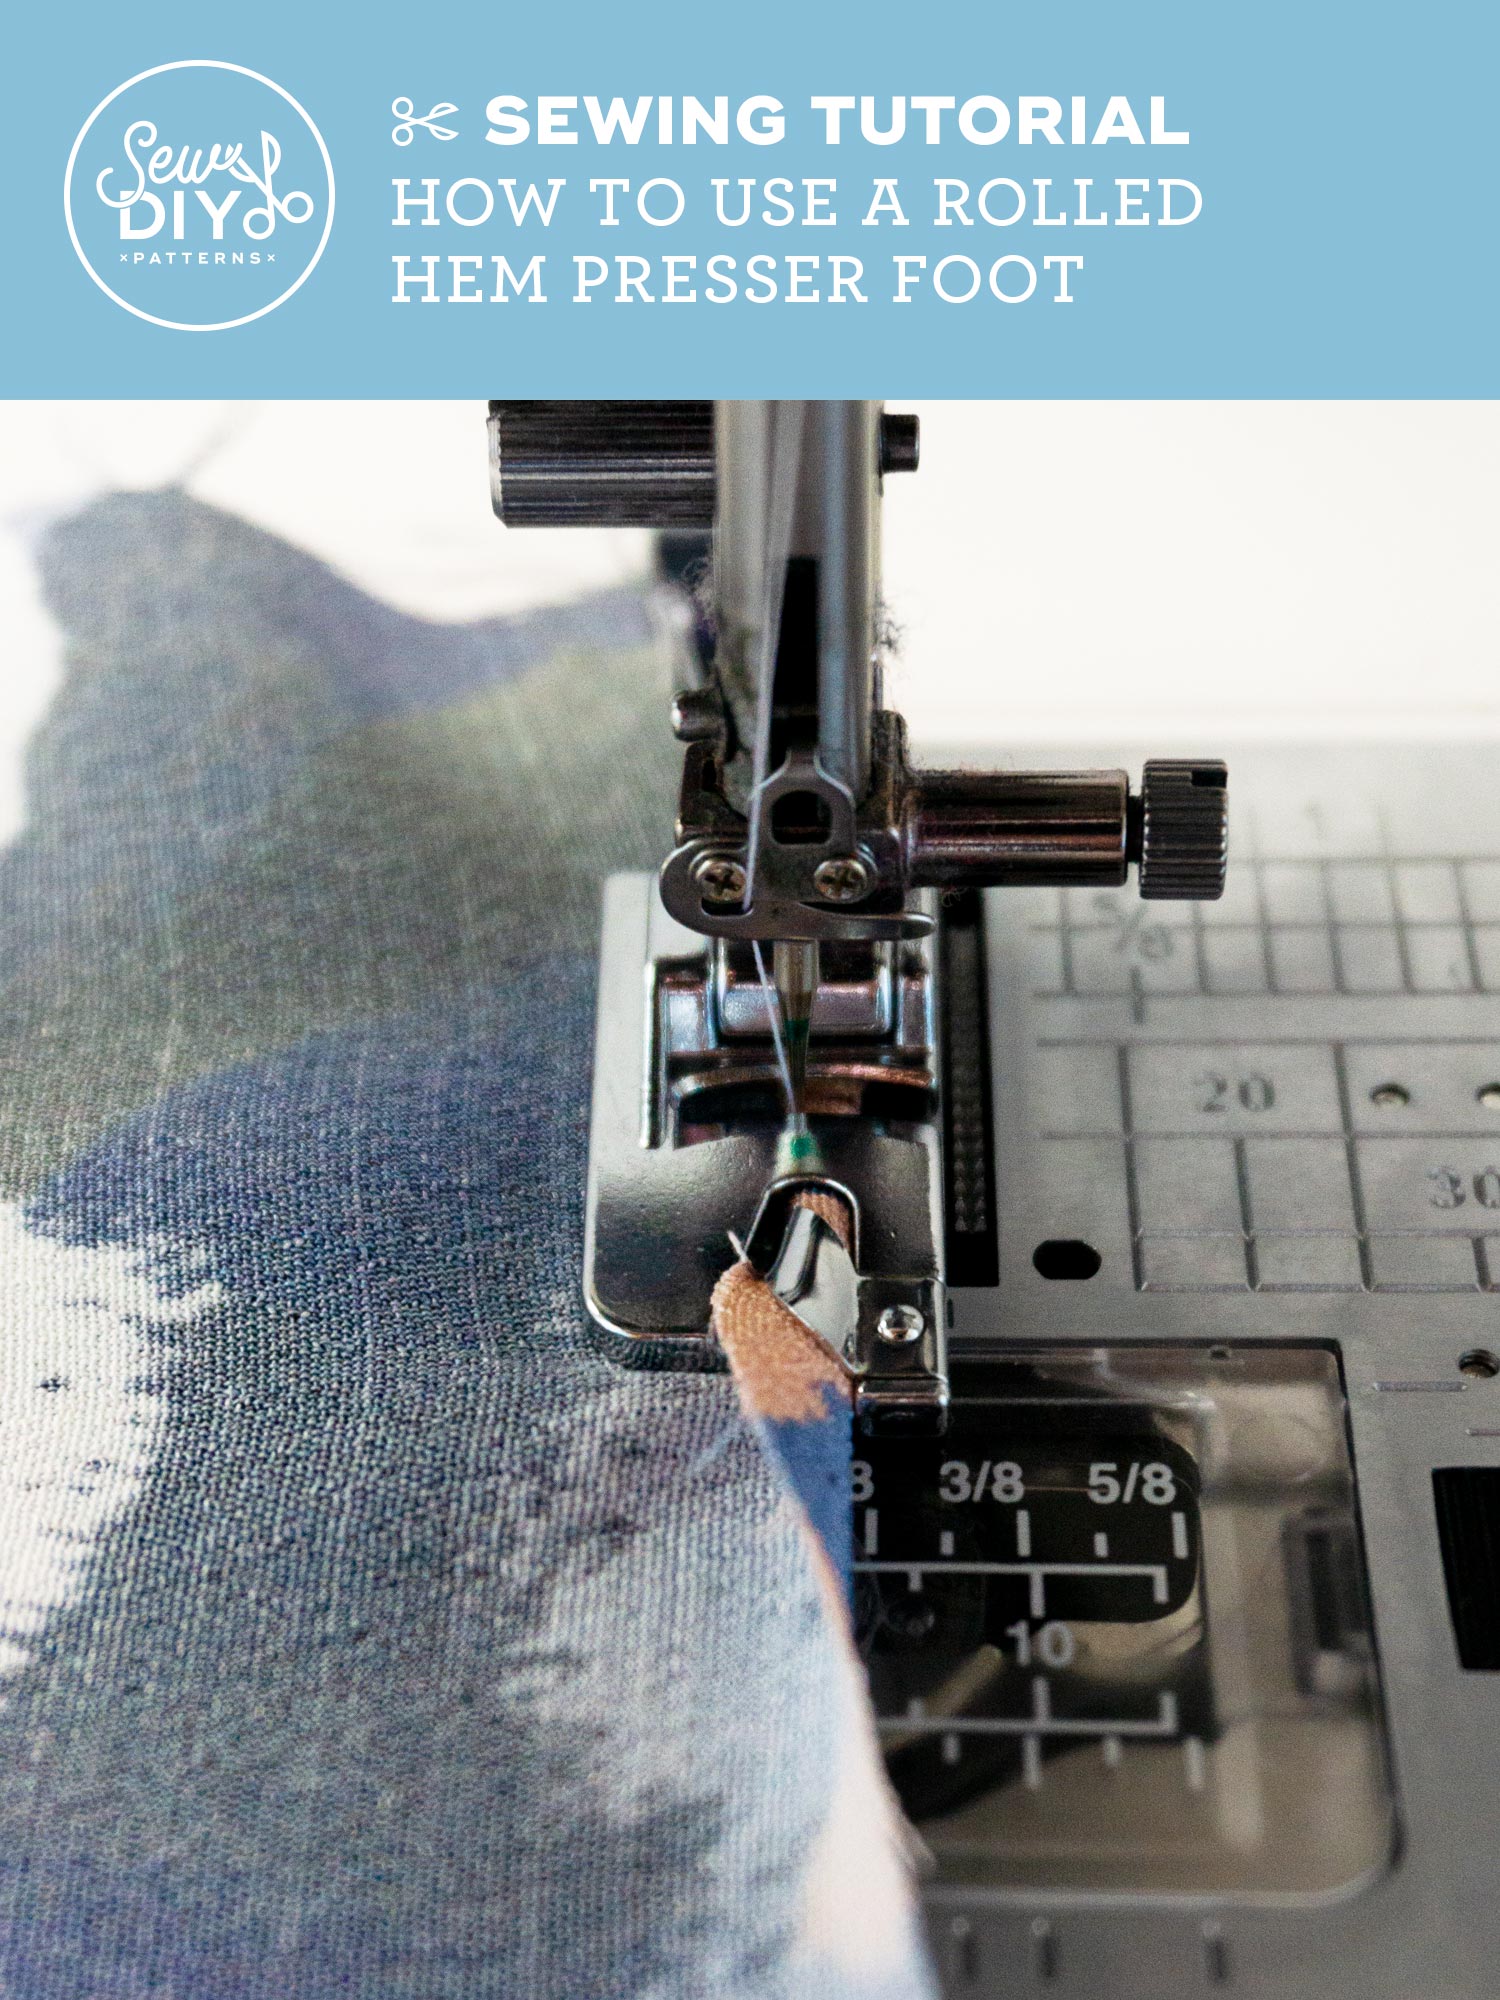 How to Use a Rolled Hem Presser Foot - VIDEO TUTORIAL — Sew DIY